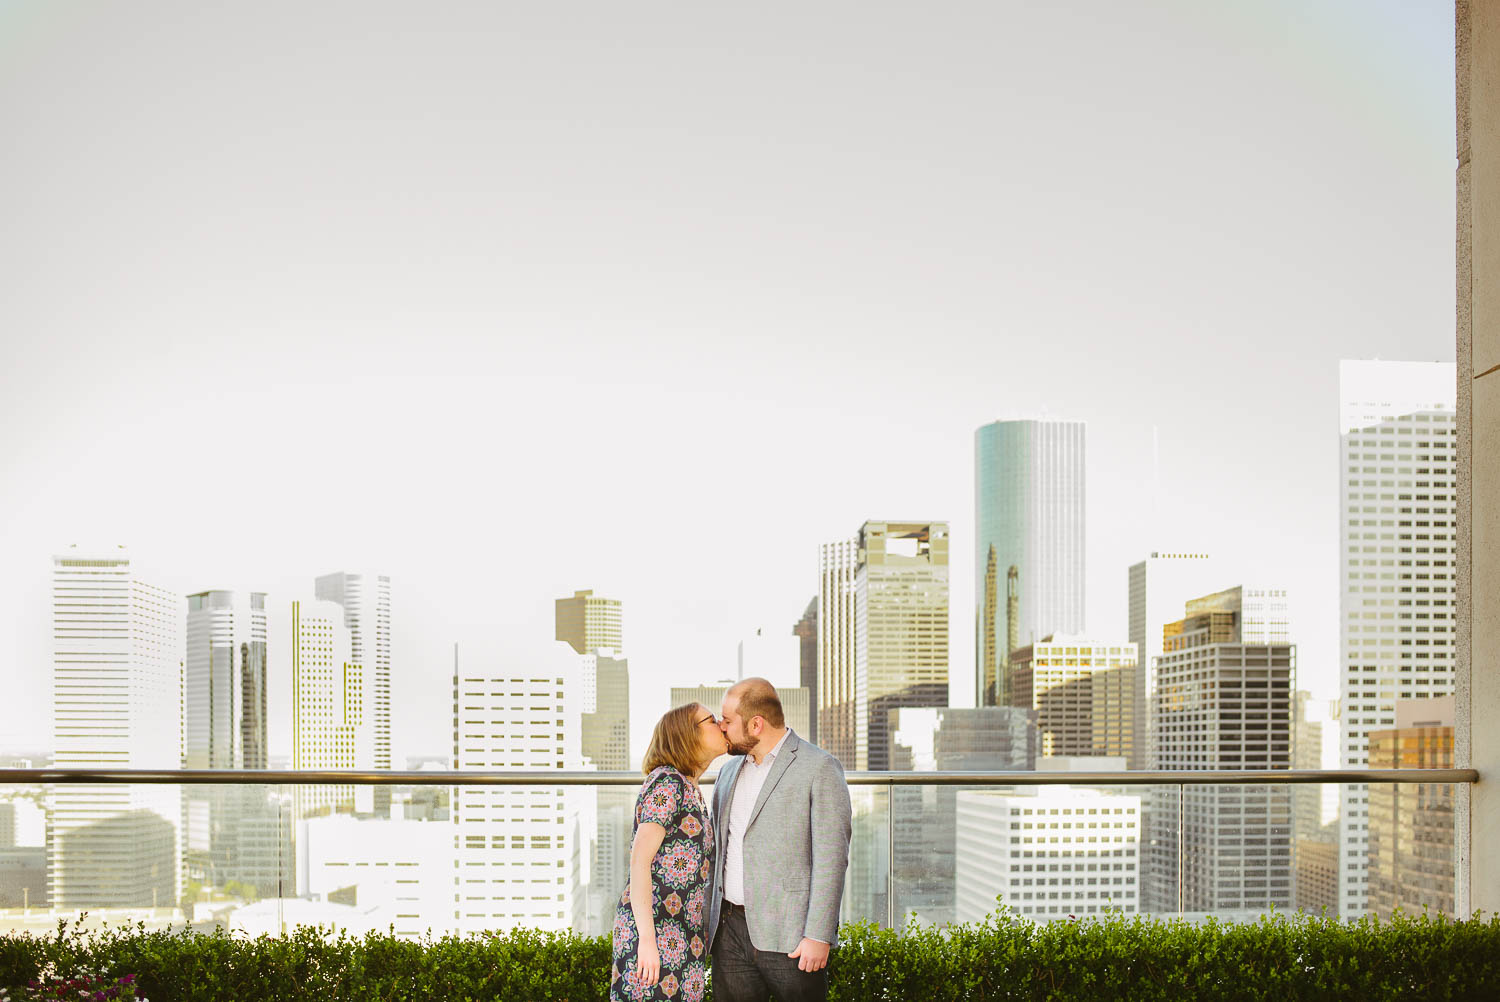 View from Hilton Americas Houston Engagement shoot Philip Thomas Photography